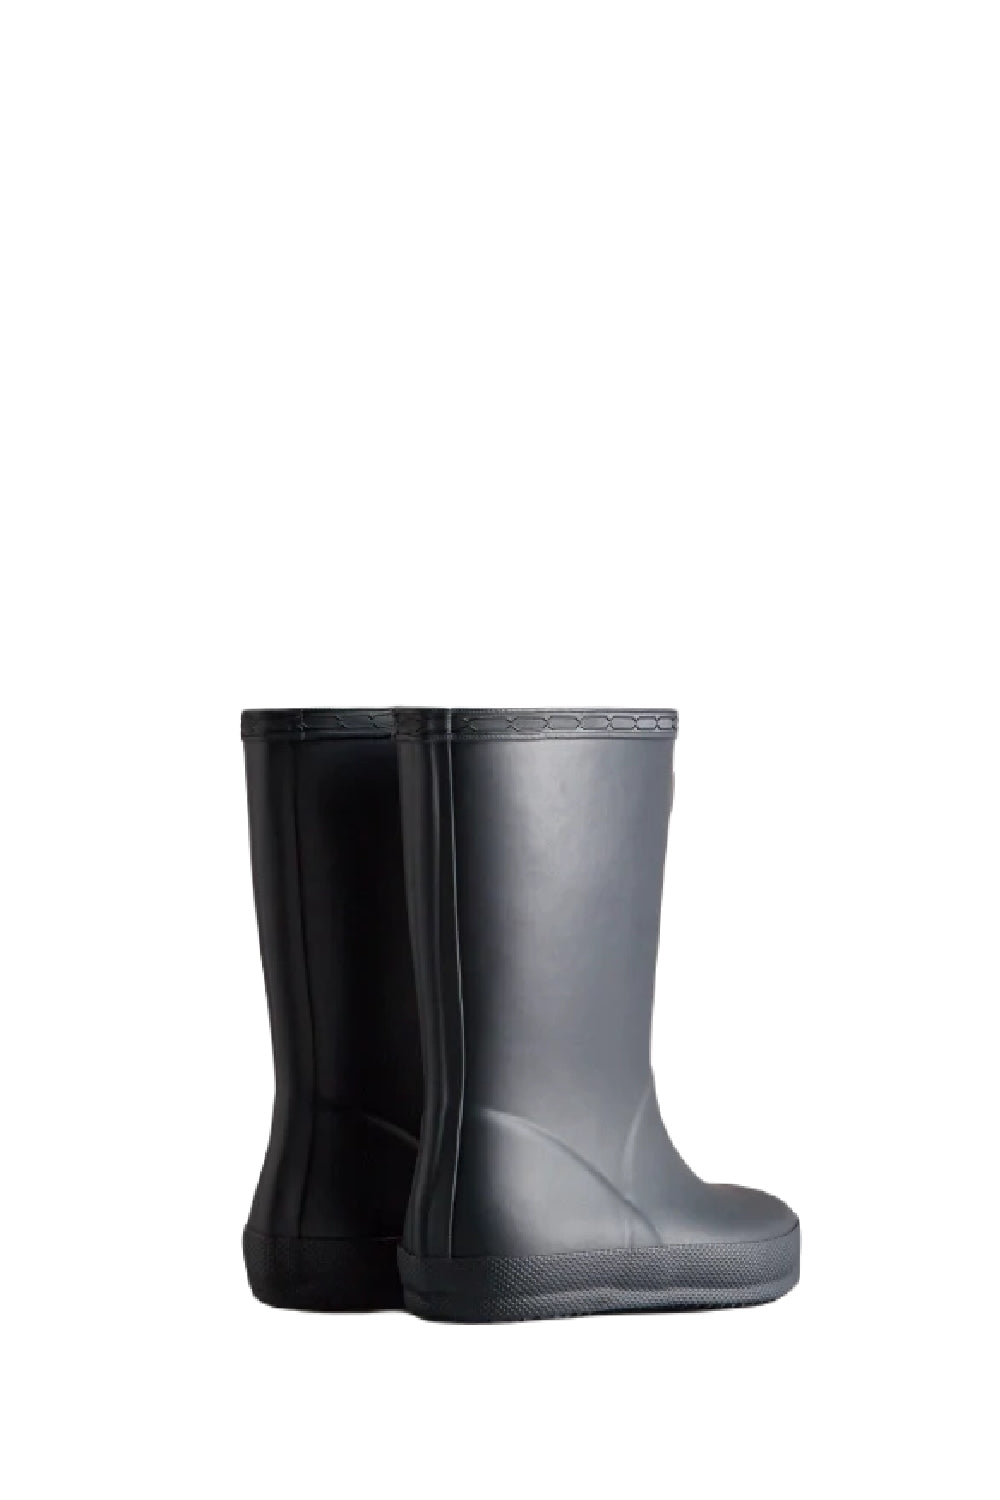 Hunter Kids First Classic Wellington Boots in Navy